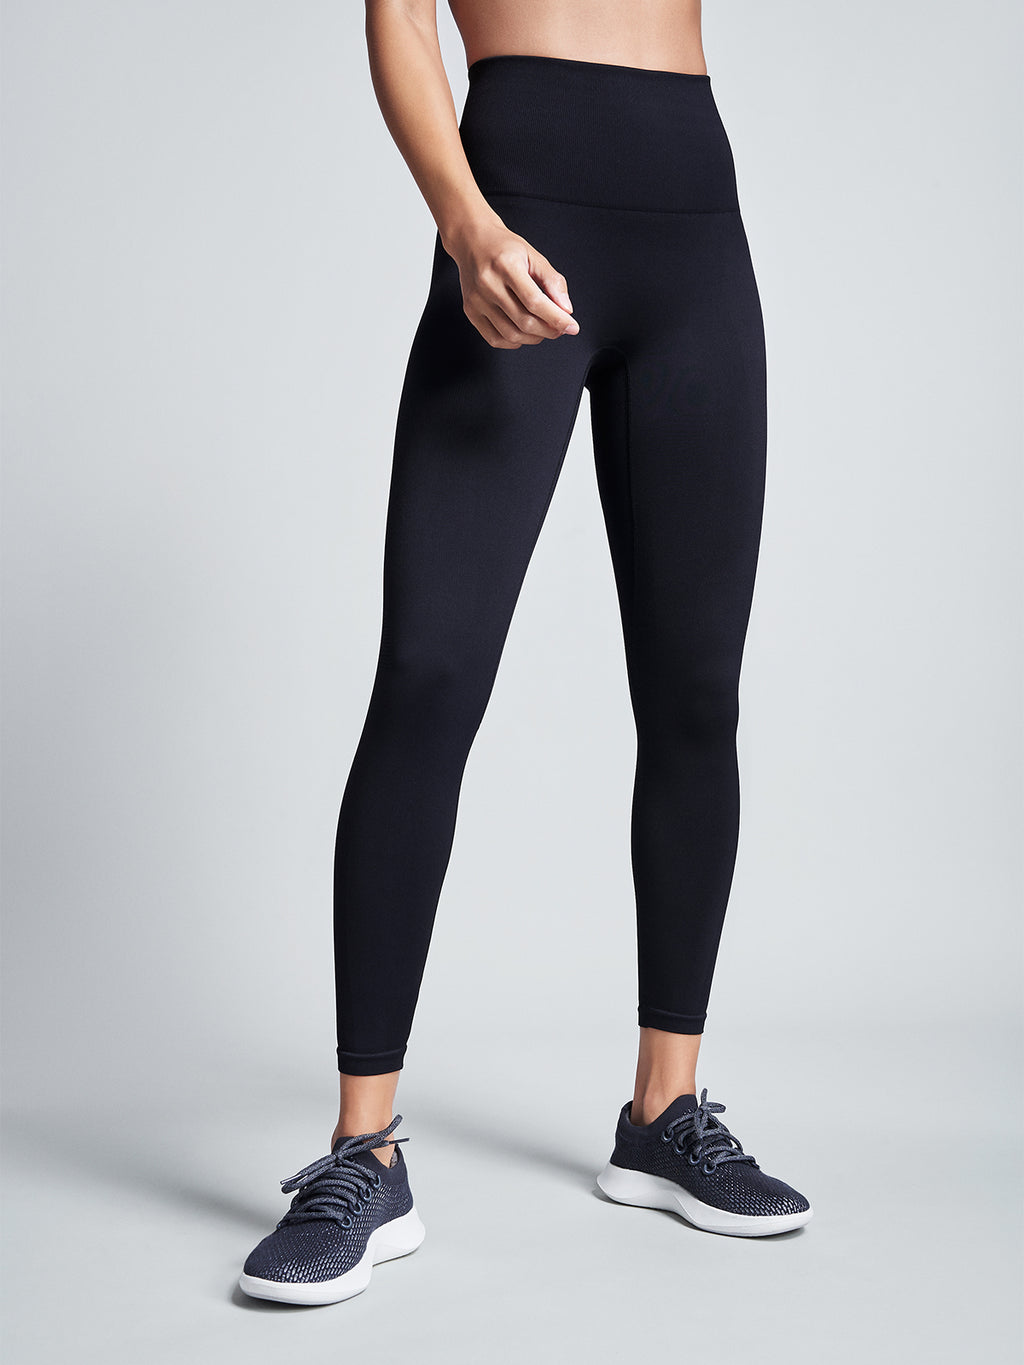 Black High Waisted Perfect Body Sculpting Activewear Leggings